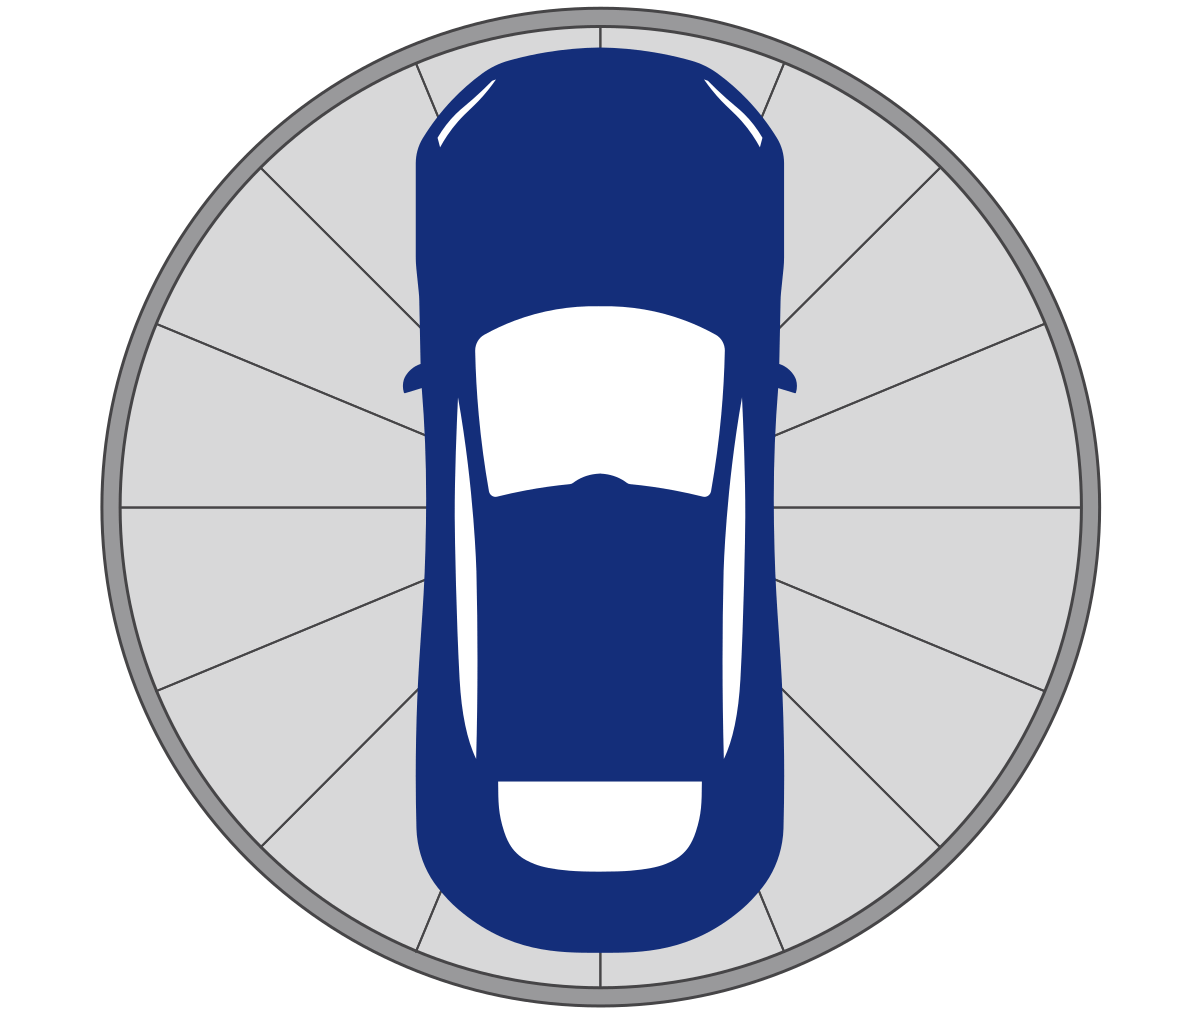 Diagram of a car turntable from birds eye view with navy blue car